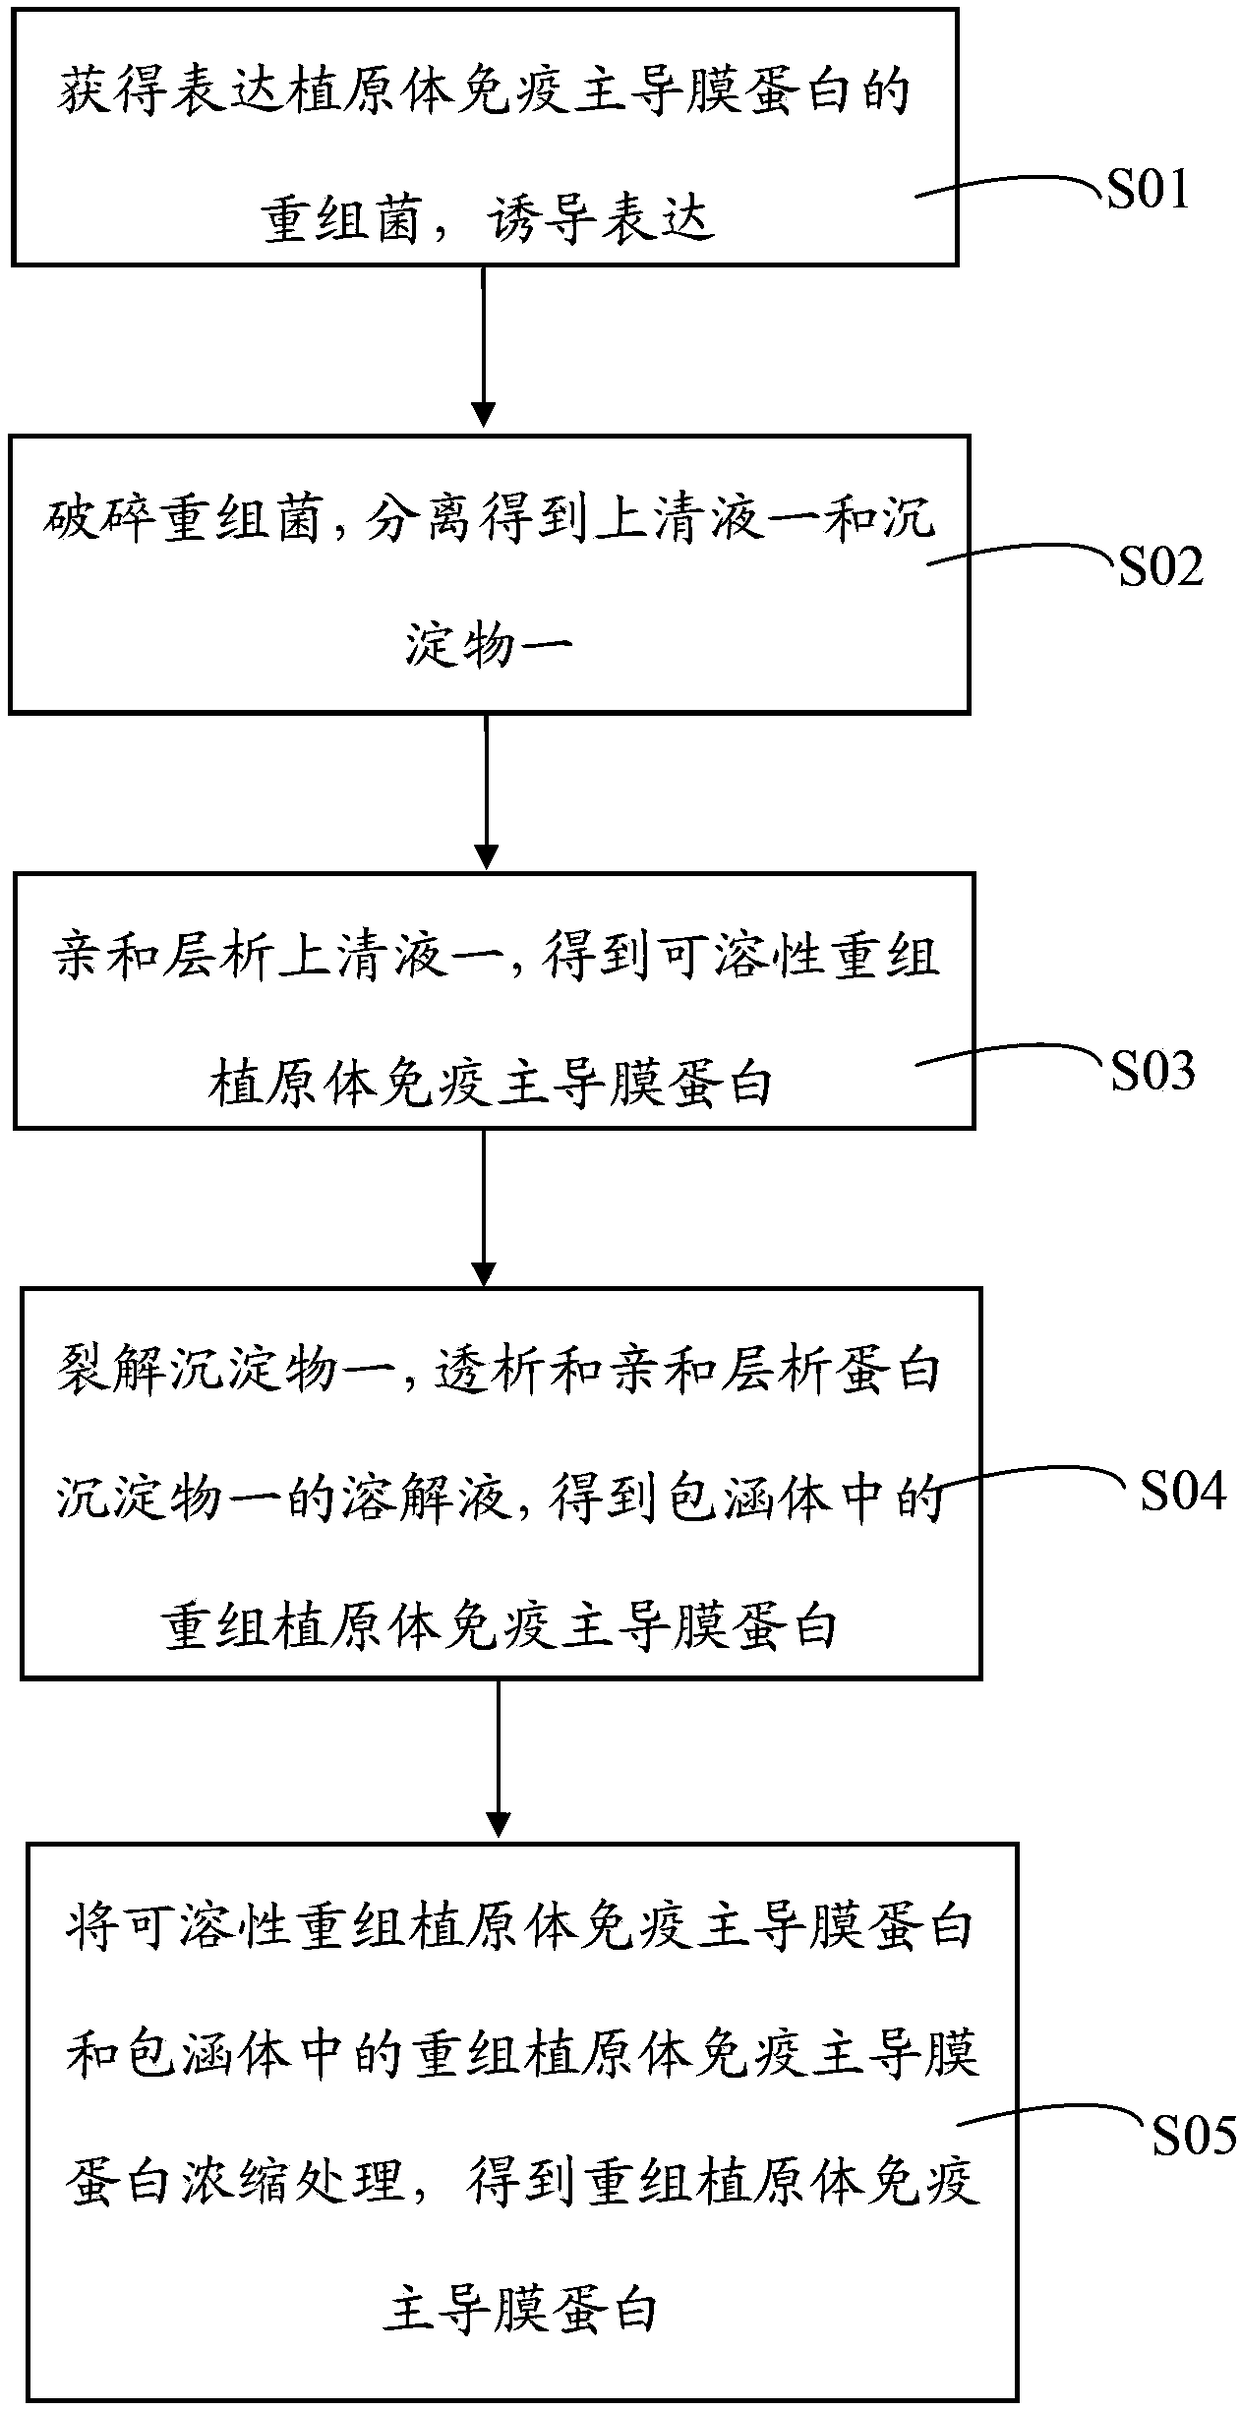 Purification method and application of recombinant phytoplasma immune dominant membrane protein